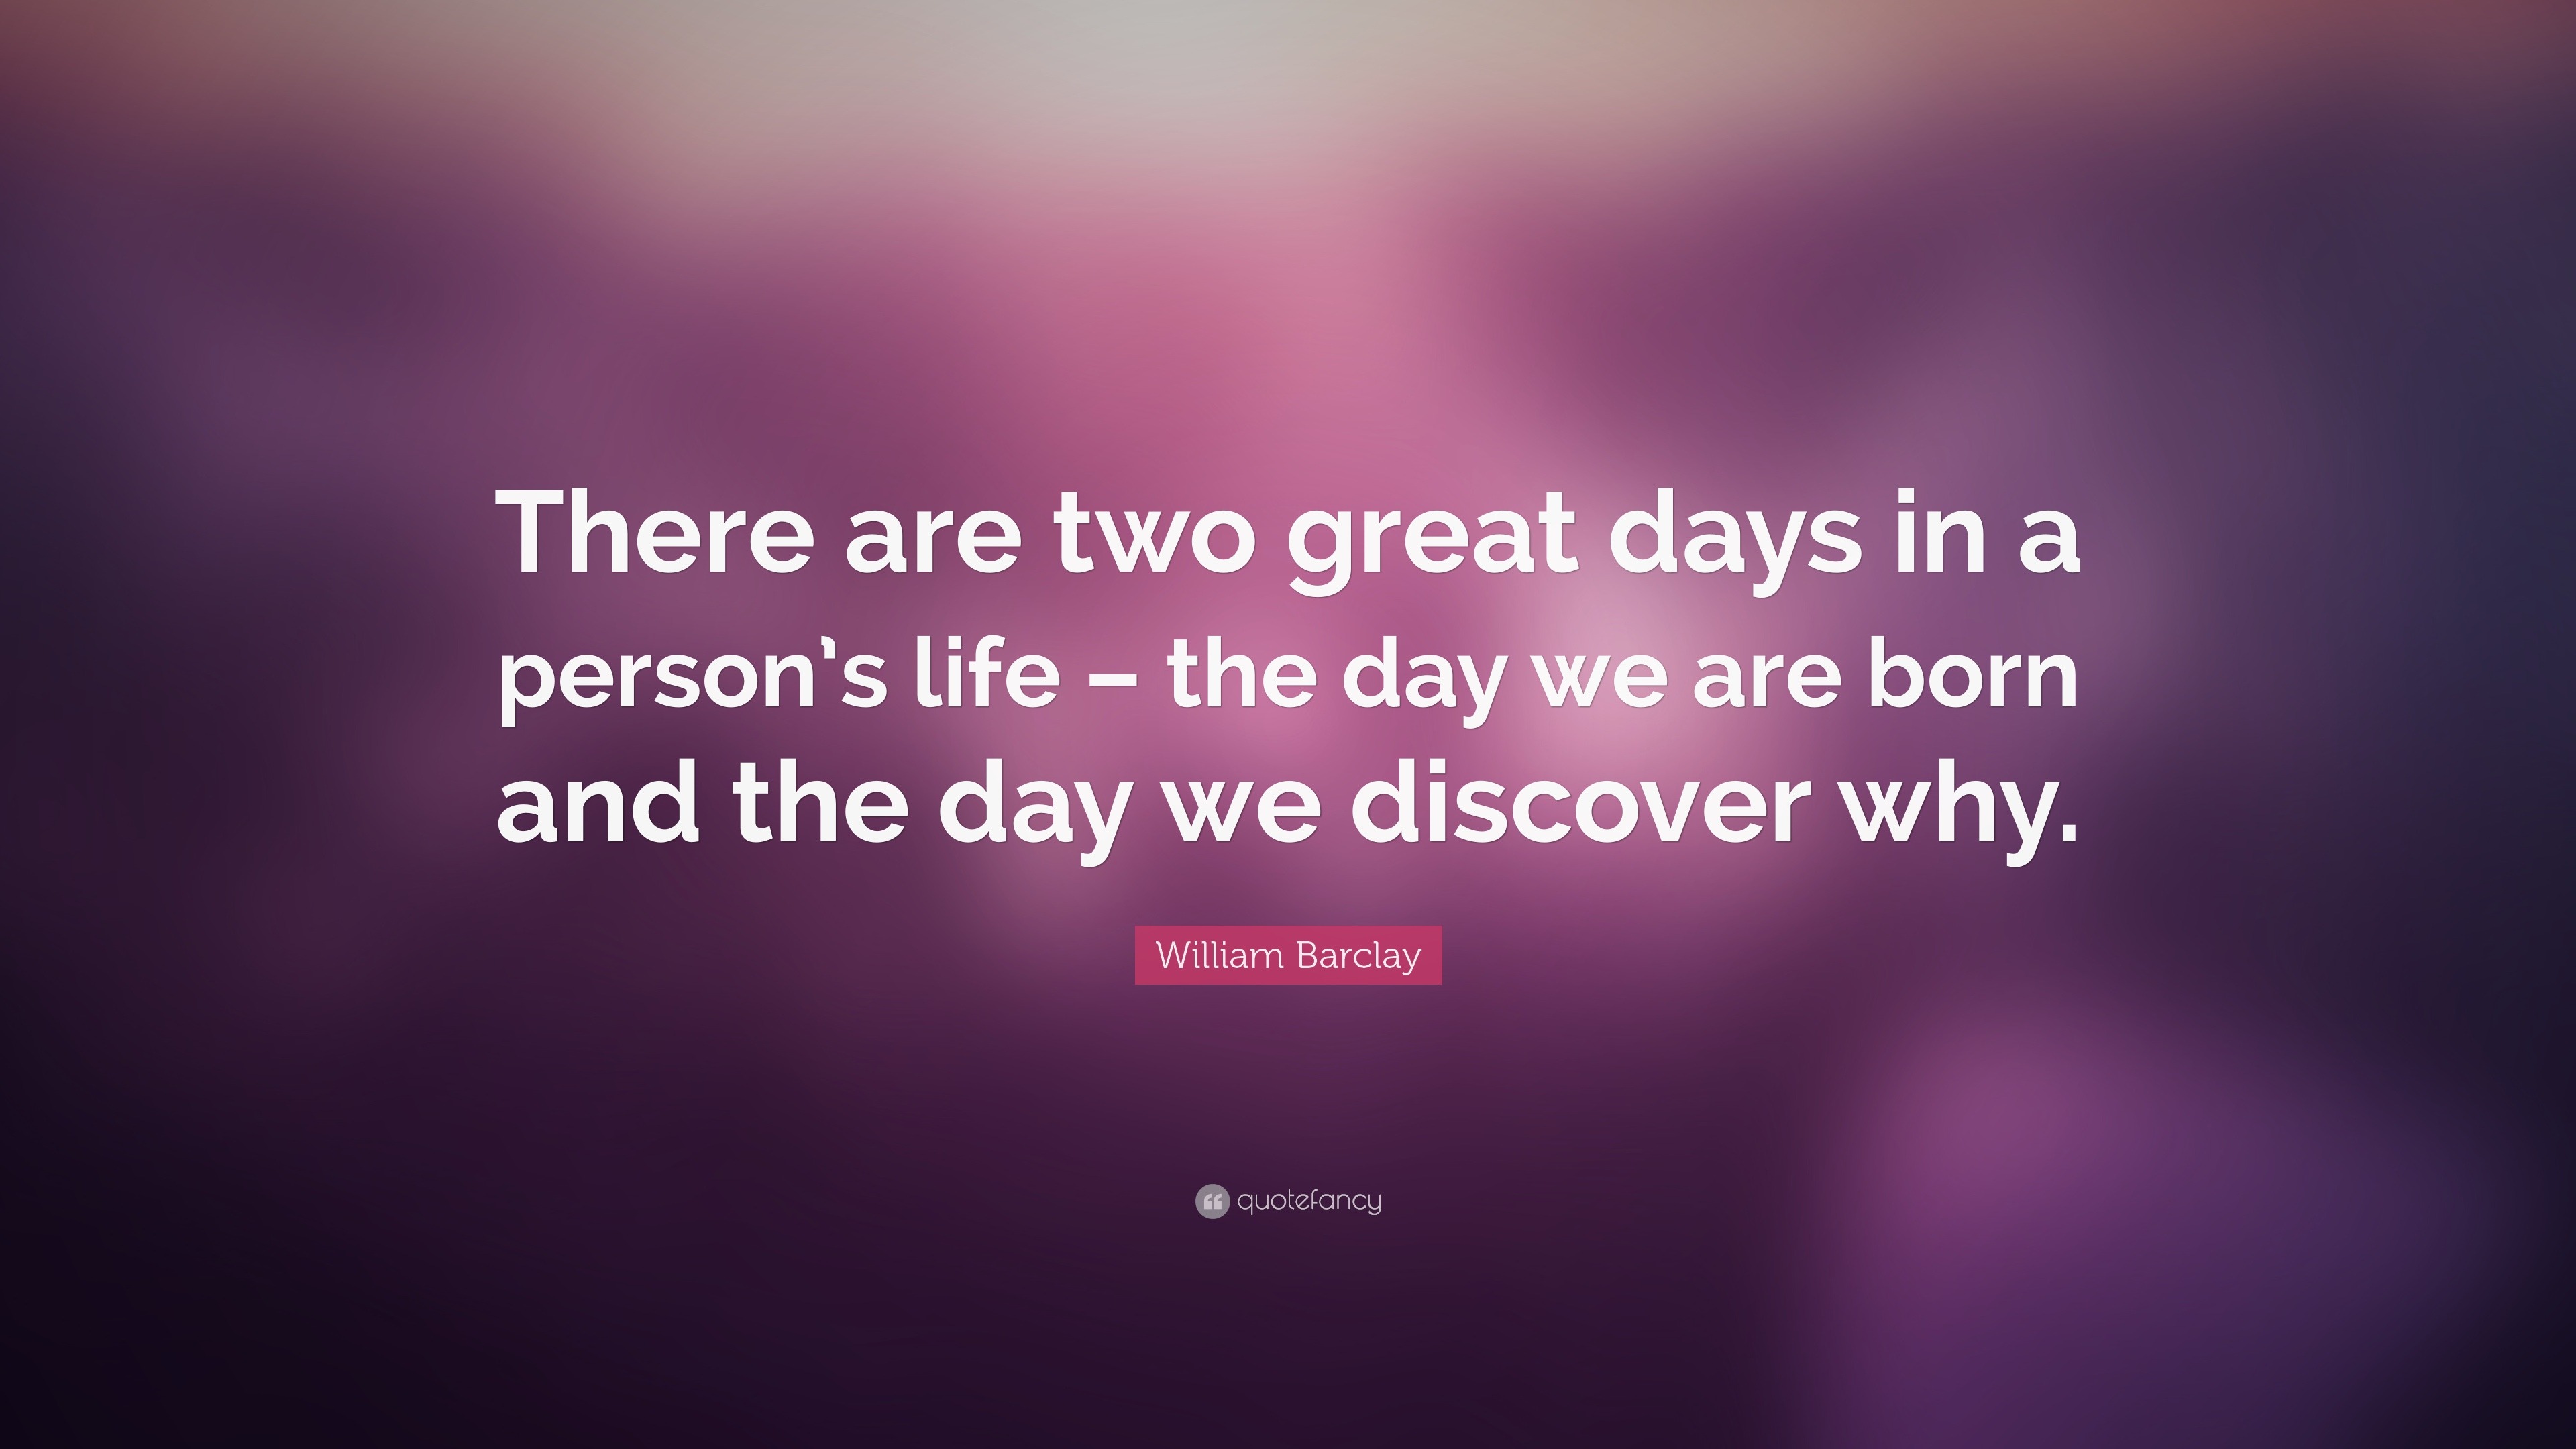 William Barclay Quote: “There are two great days in a person’s life ...